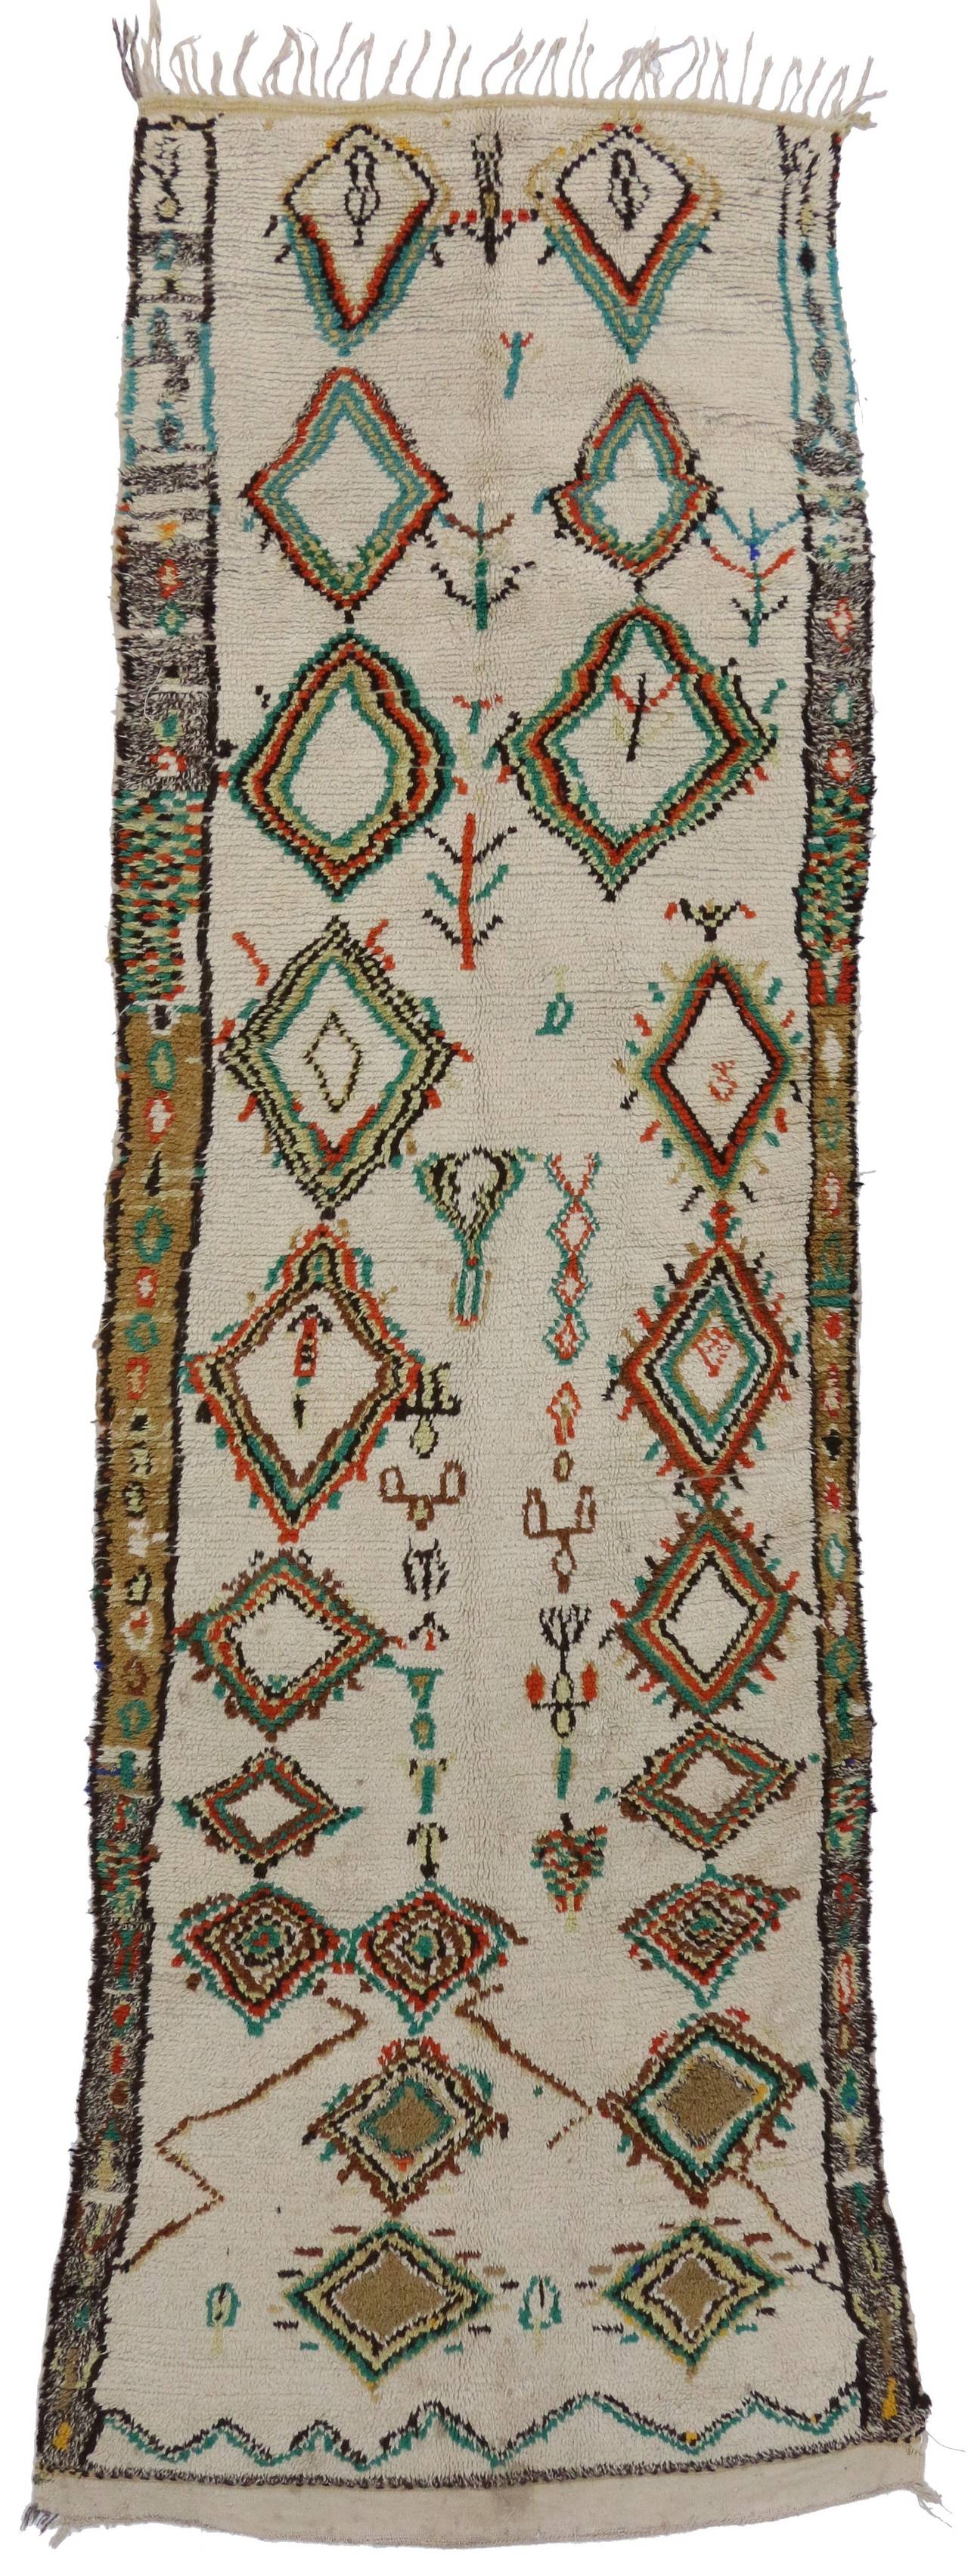 Vintage Moroccan Azilal Runner with Modern Tribal Style, Shag Hallway Runner 3